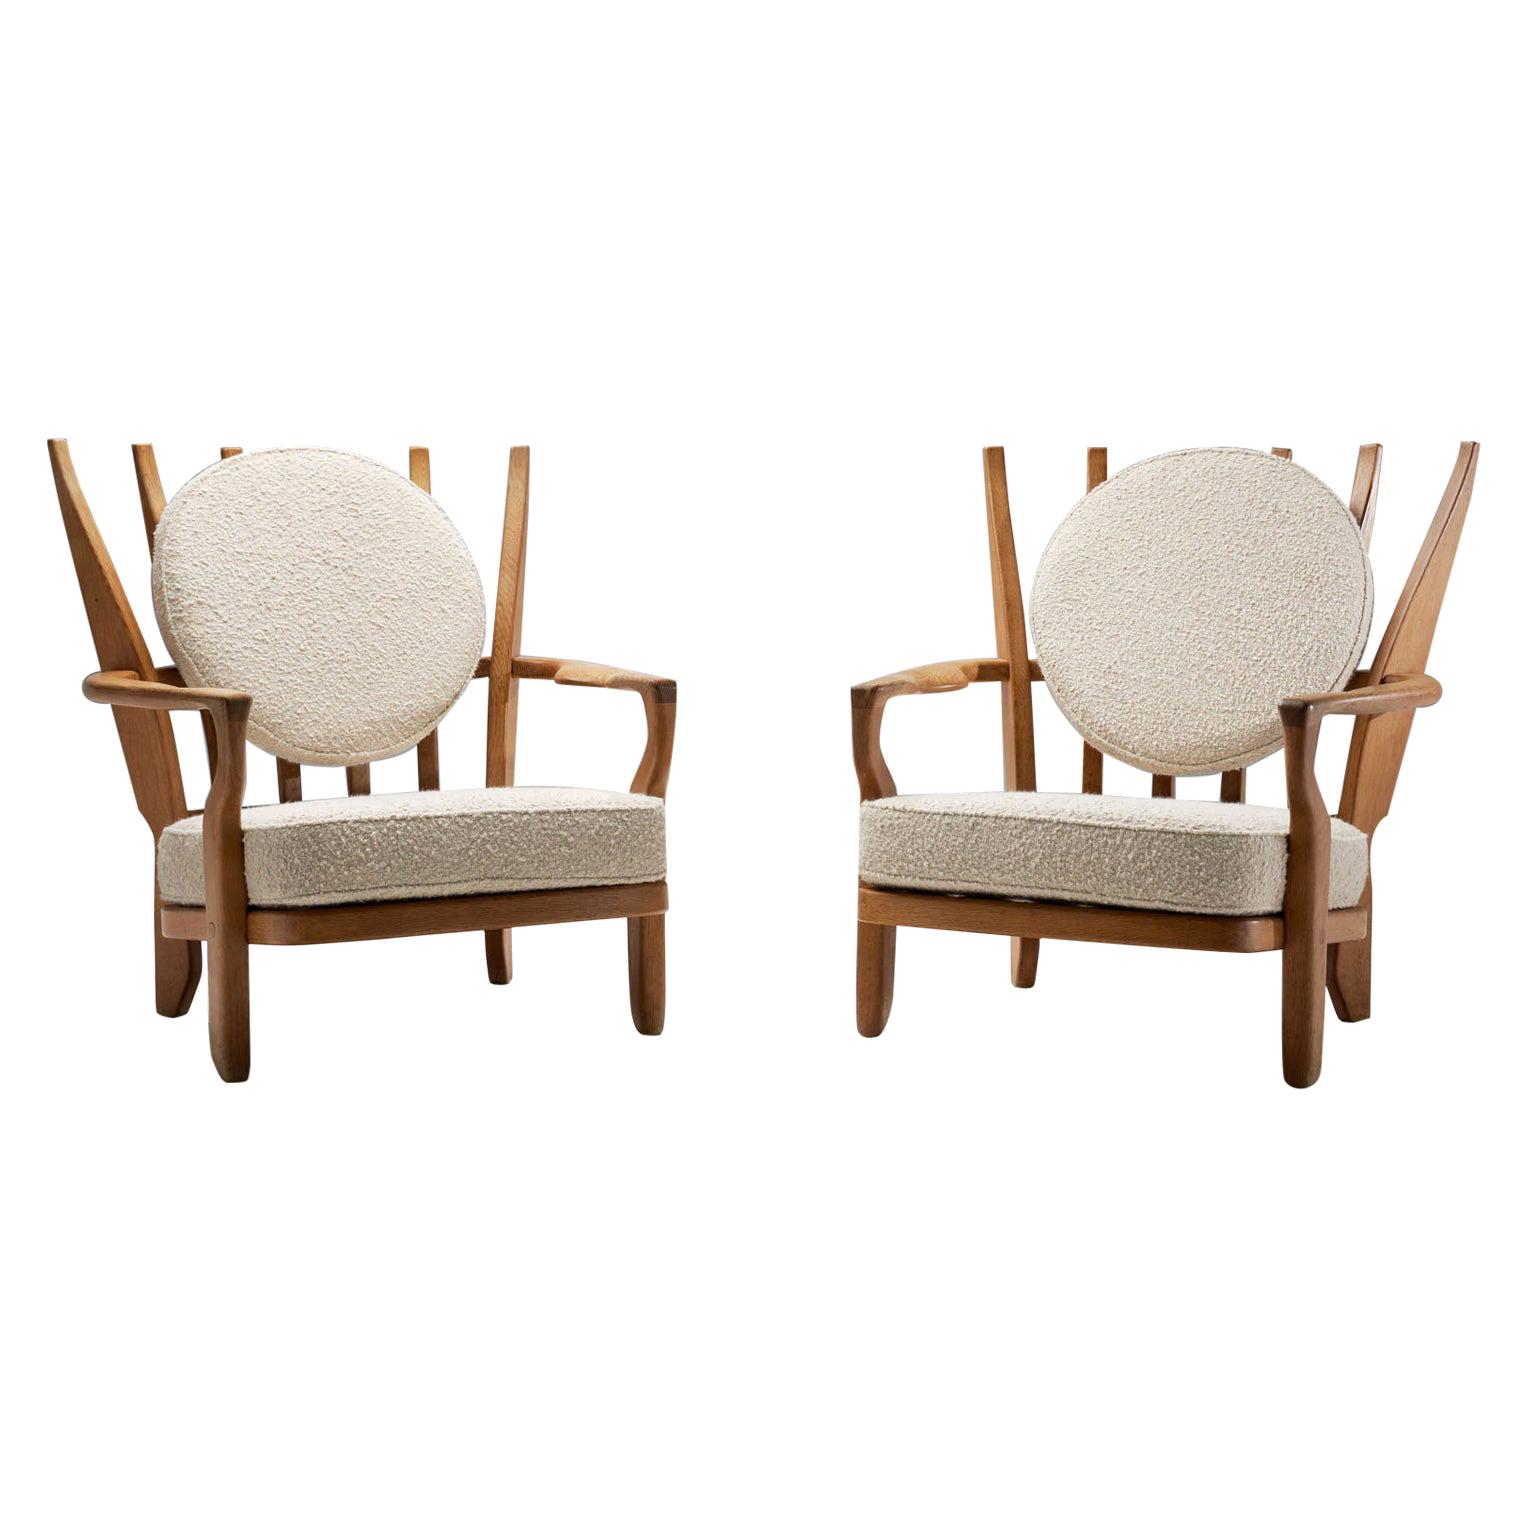 Pair of 'Juliette' Armchairs by Guillerme and Chambron, France, 1950s